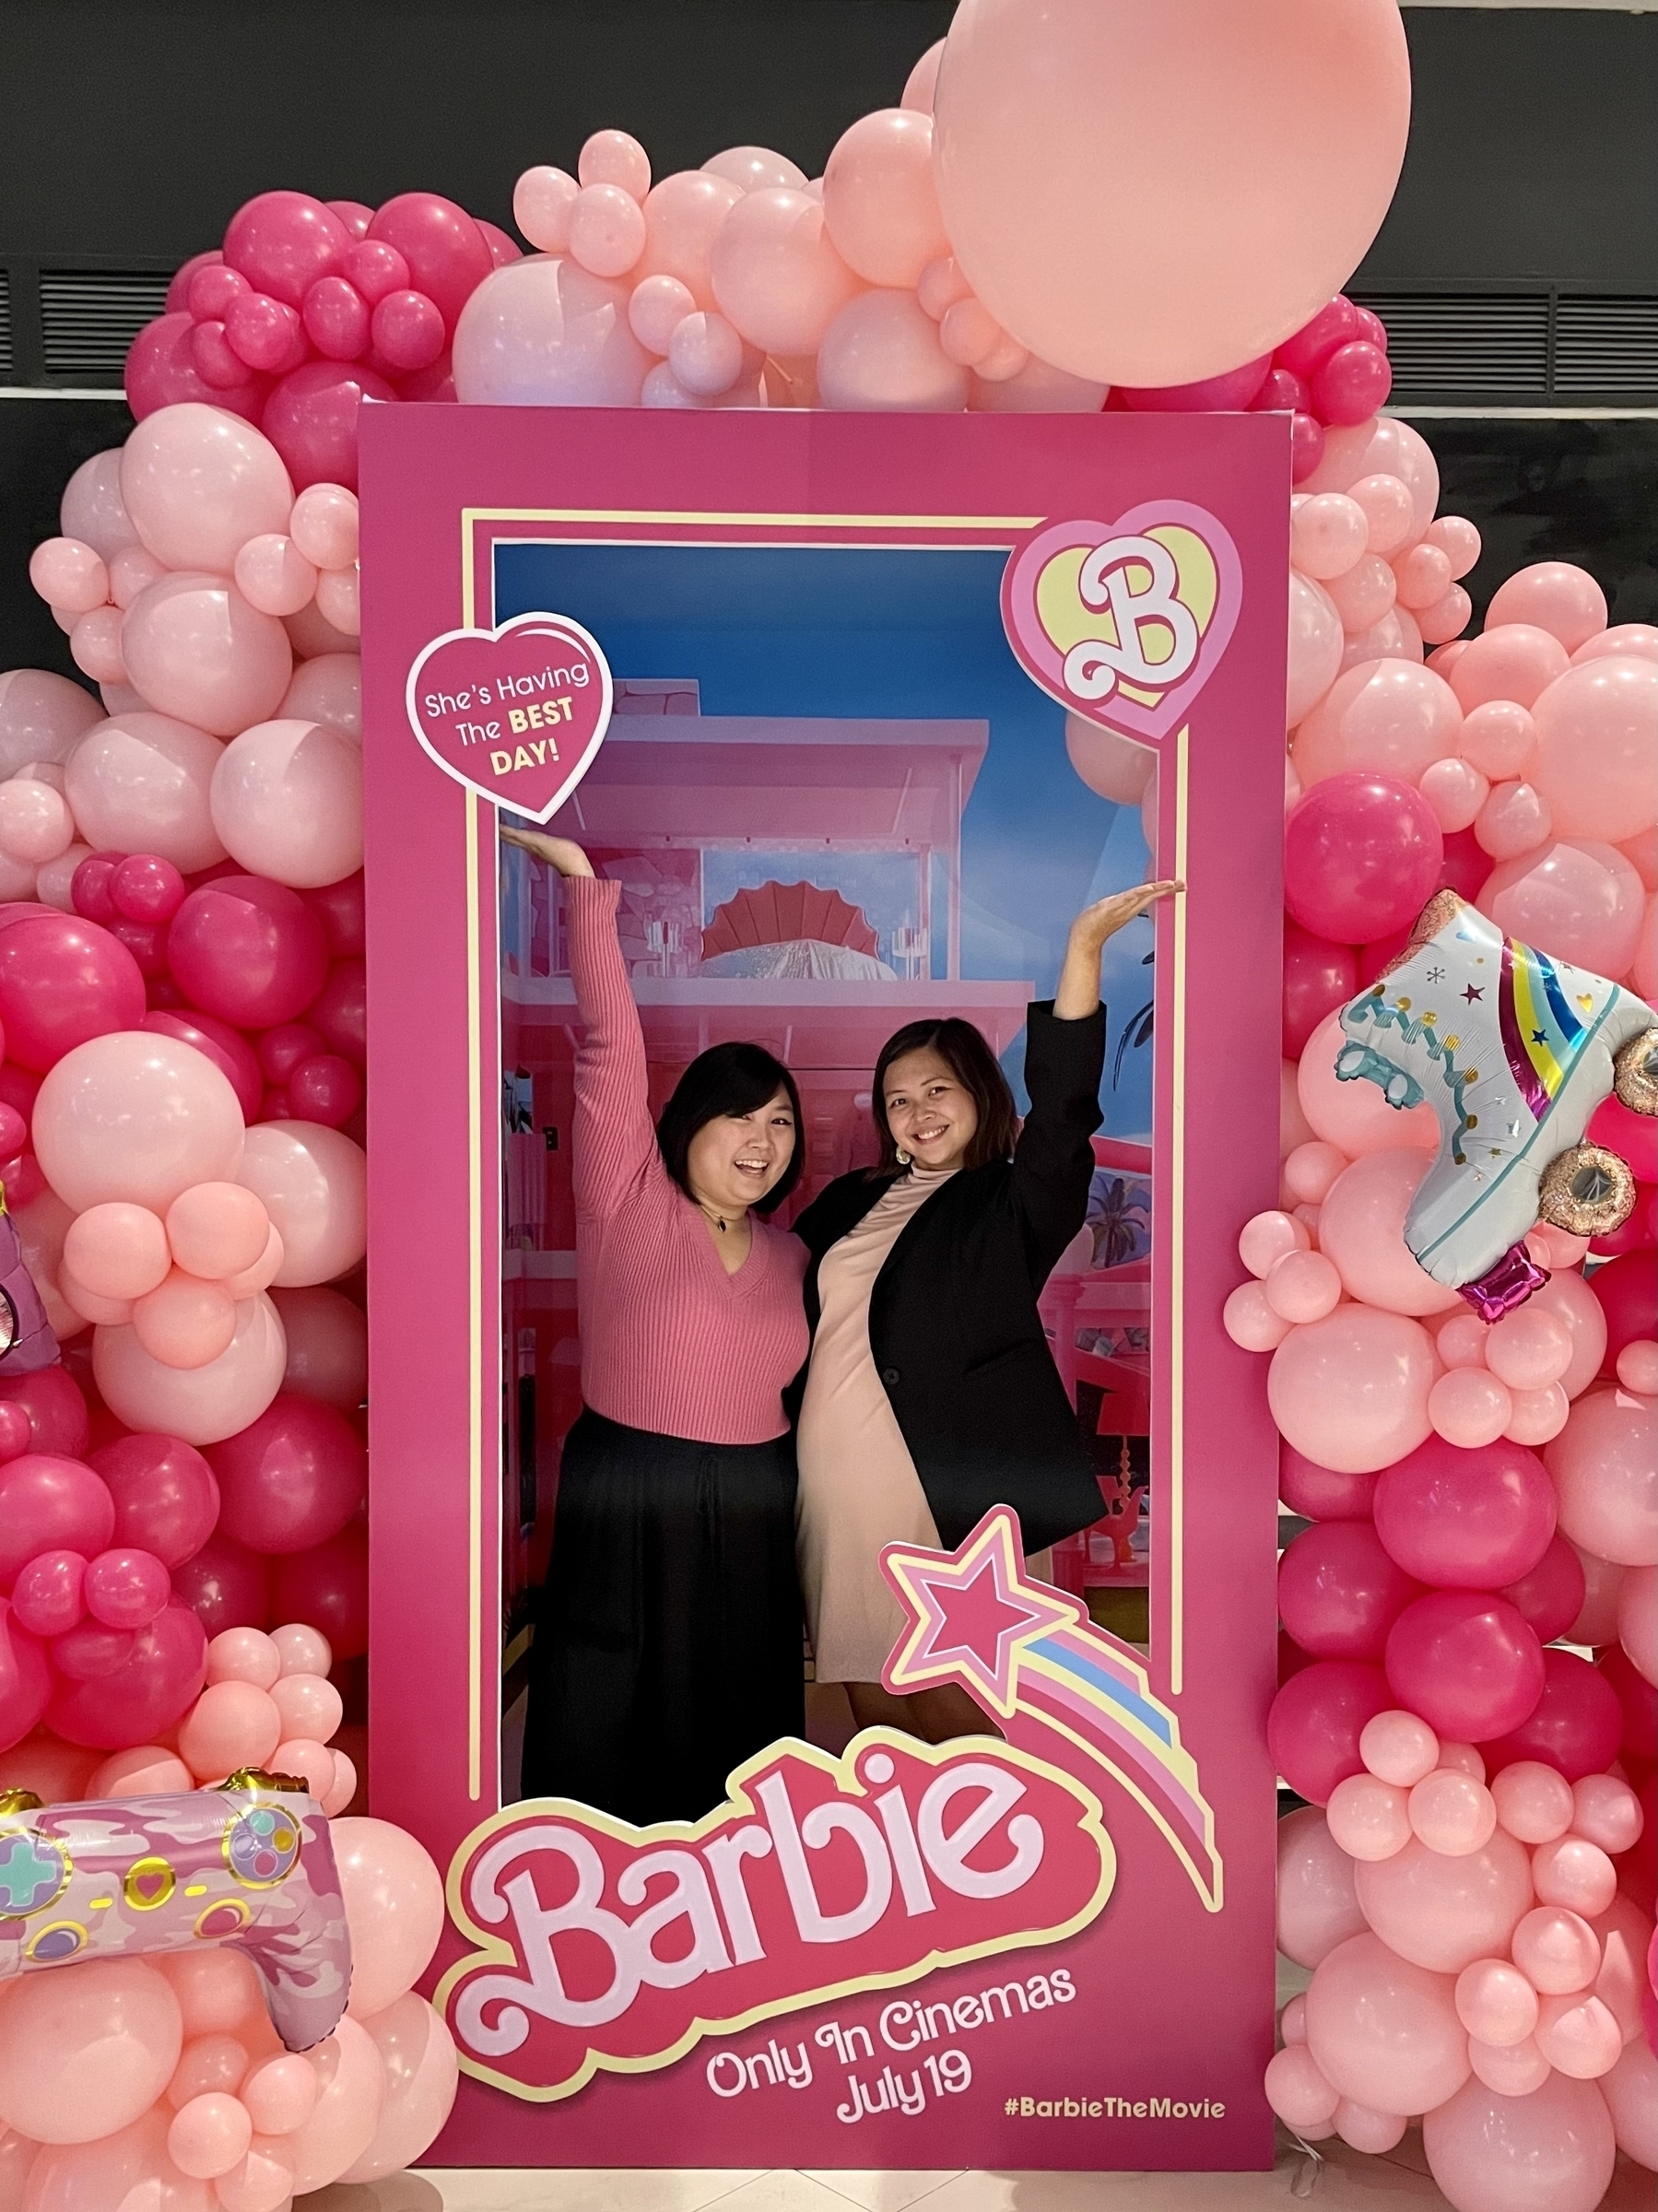 Chi and Karen posing in the Barbie Box promotional stand for the movie. Chi is dressed in a pink long-sleeved top and a black long skirt, while Karen is wearing a light pink turtleneck dress with a black blazer.